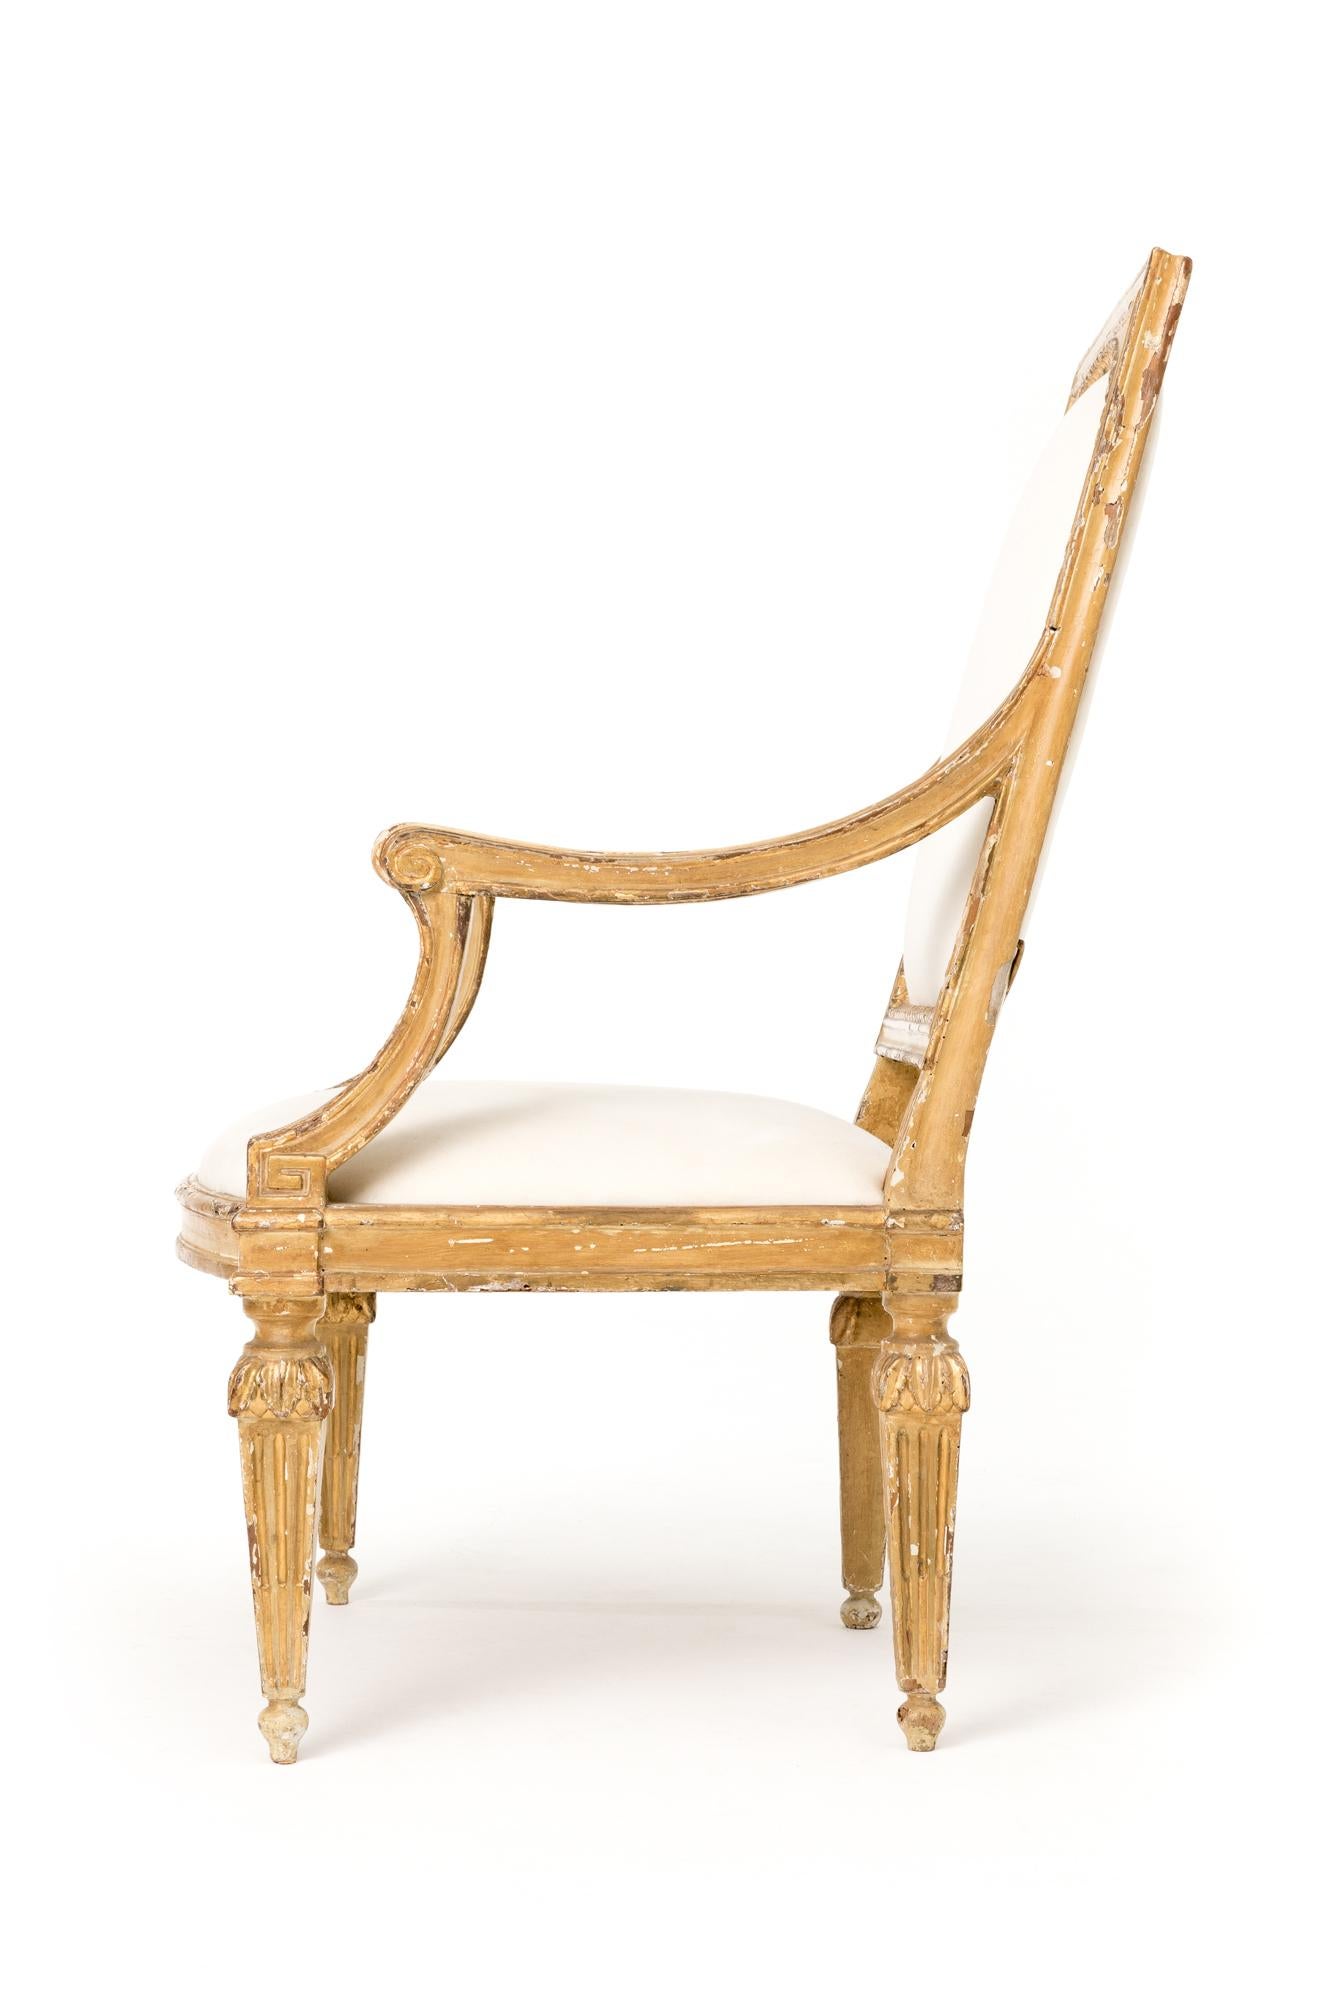 Large fauteuil Louis XVI (1774-1791) Carved and gilded wood. Upholstered in velvet. 18th Century, France.